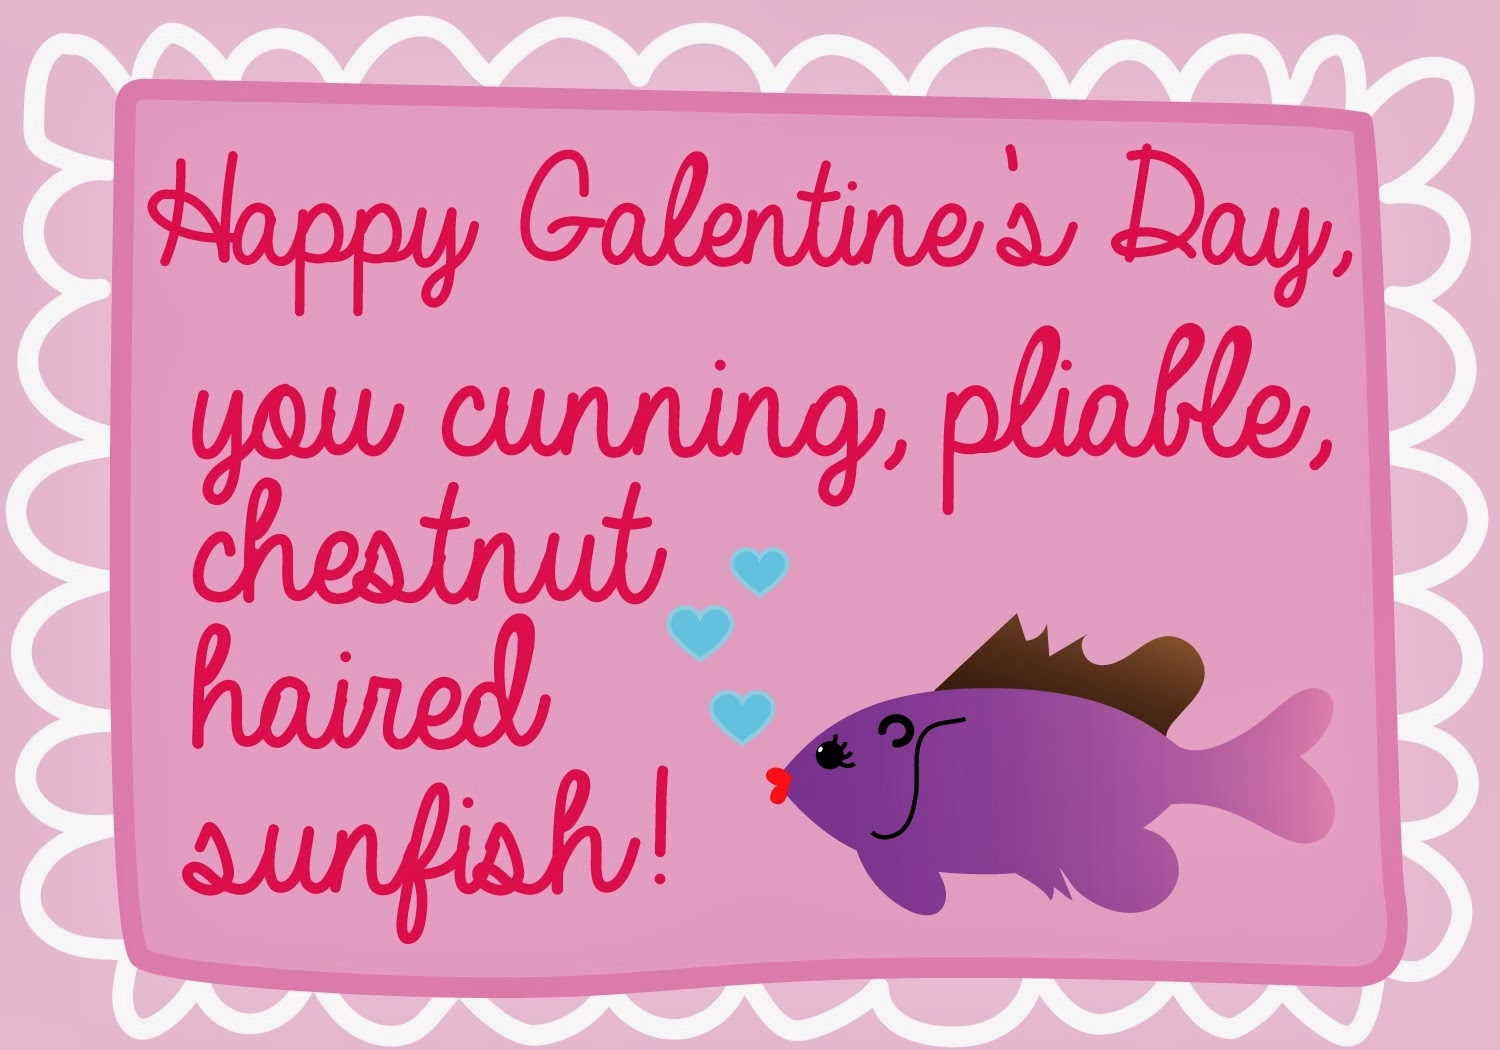 ... with Caitlin: Happy (belated) Galentine's Day!1500 x 1050